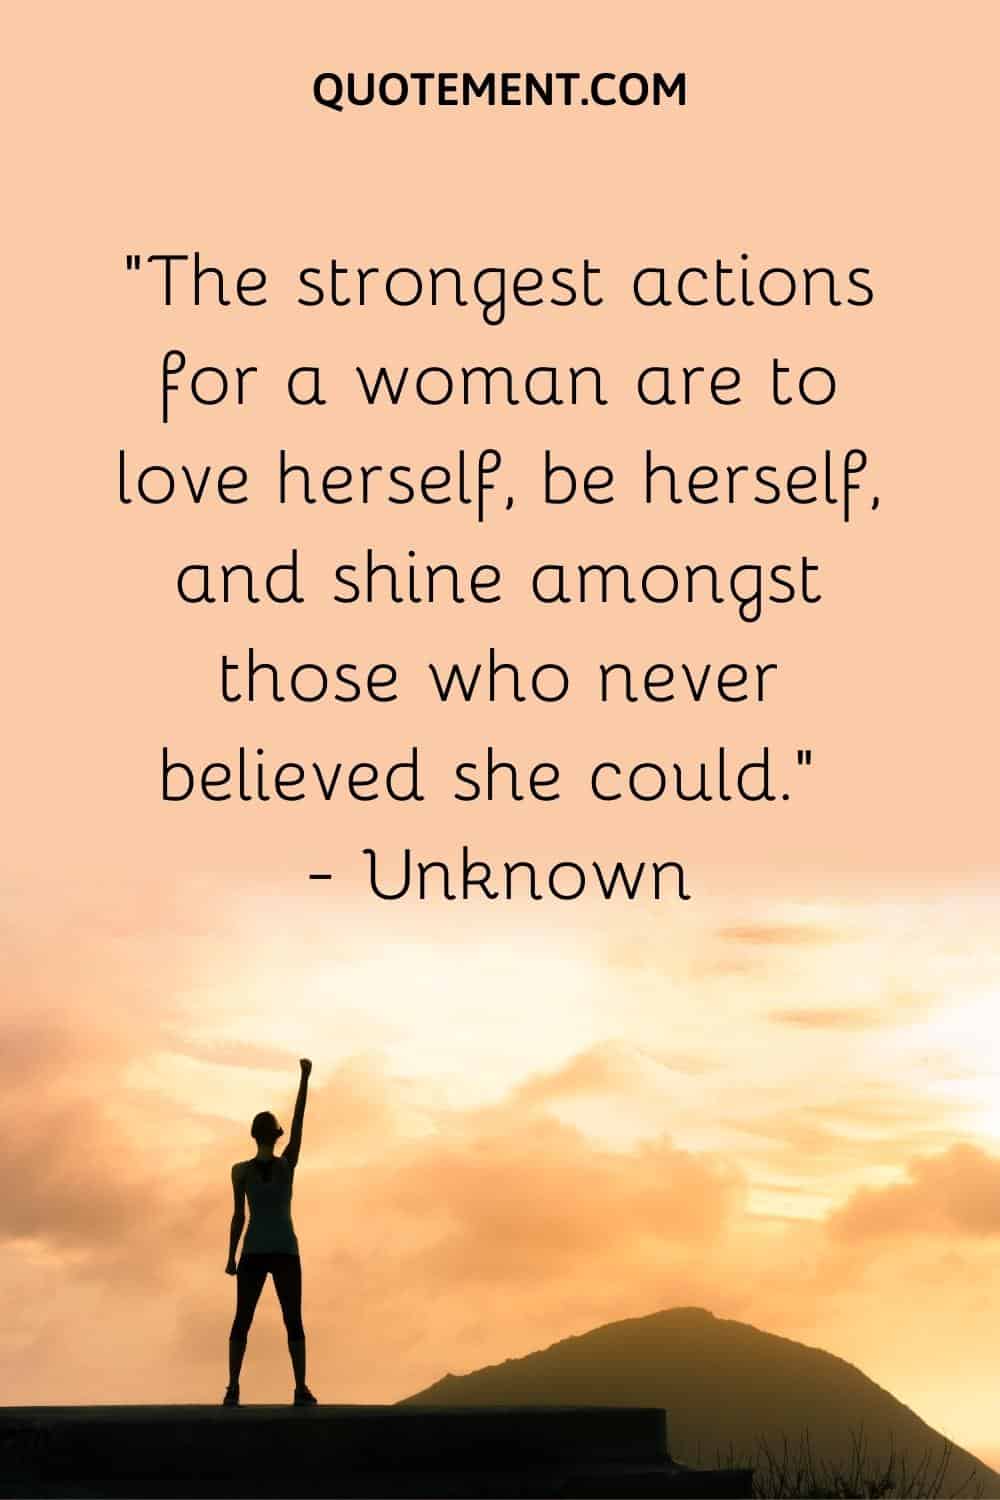 The strongest actions for a woman are to love herself, be herself, and shine amongst those who never believed she could